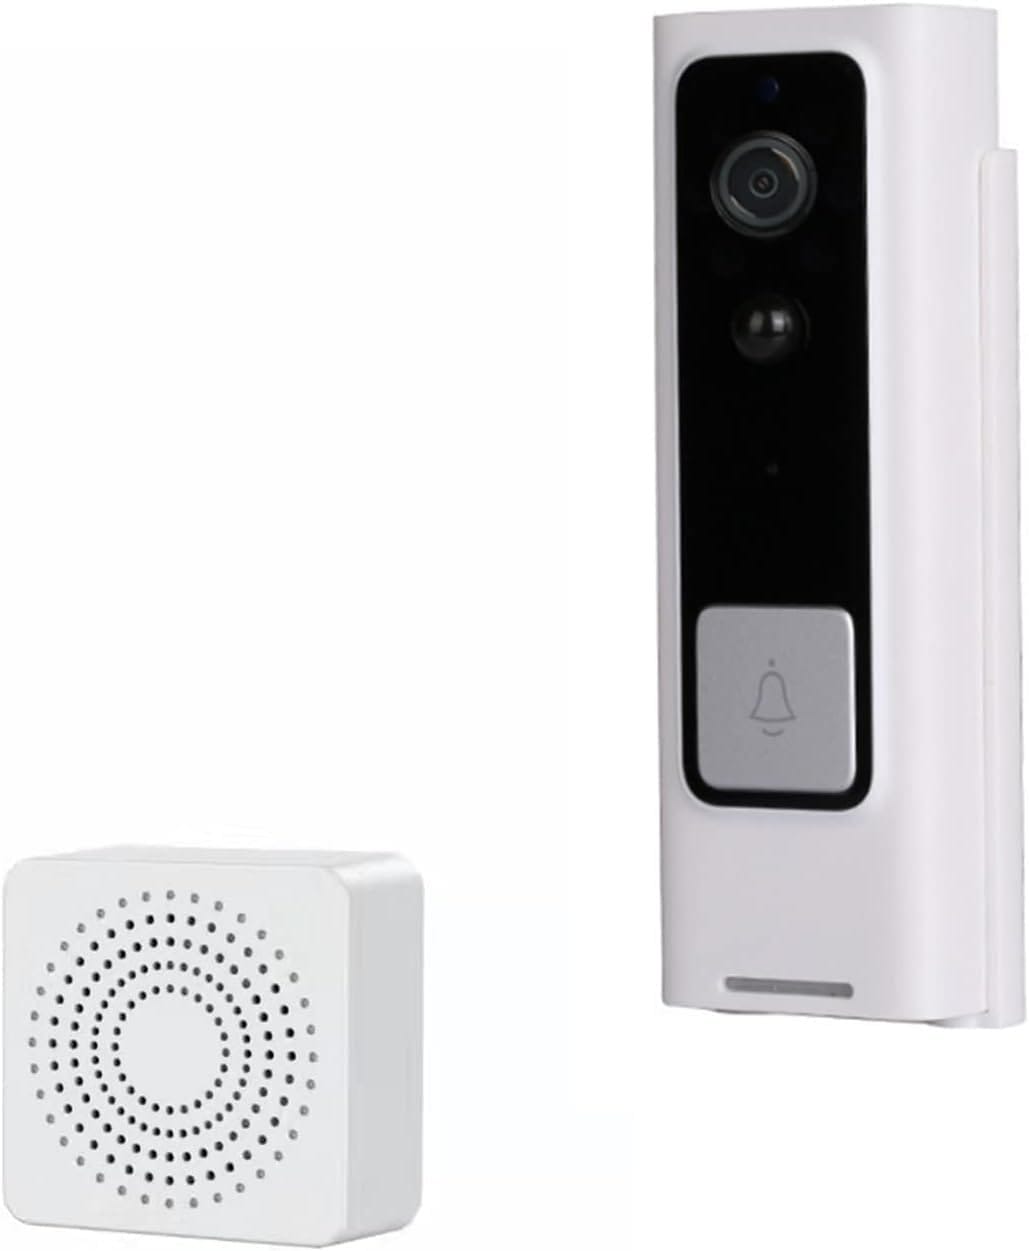 Doorbell Camera Wireless with HD Video, 70° View, Electrical Equipment, Video Doorbell with Night Vision,Two Way Audio, Motion Detection, Home Security System, WiFi Doorbell